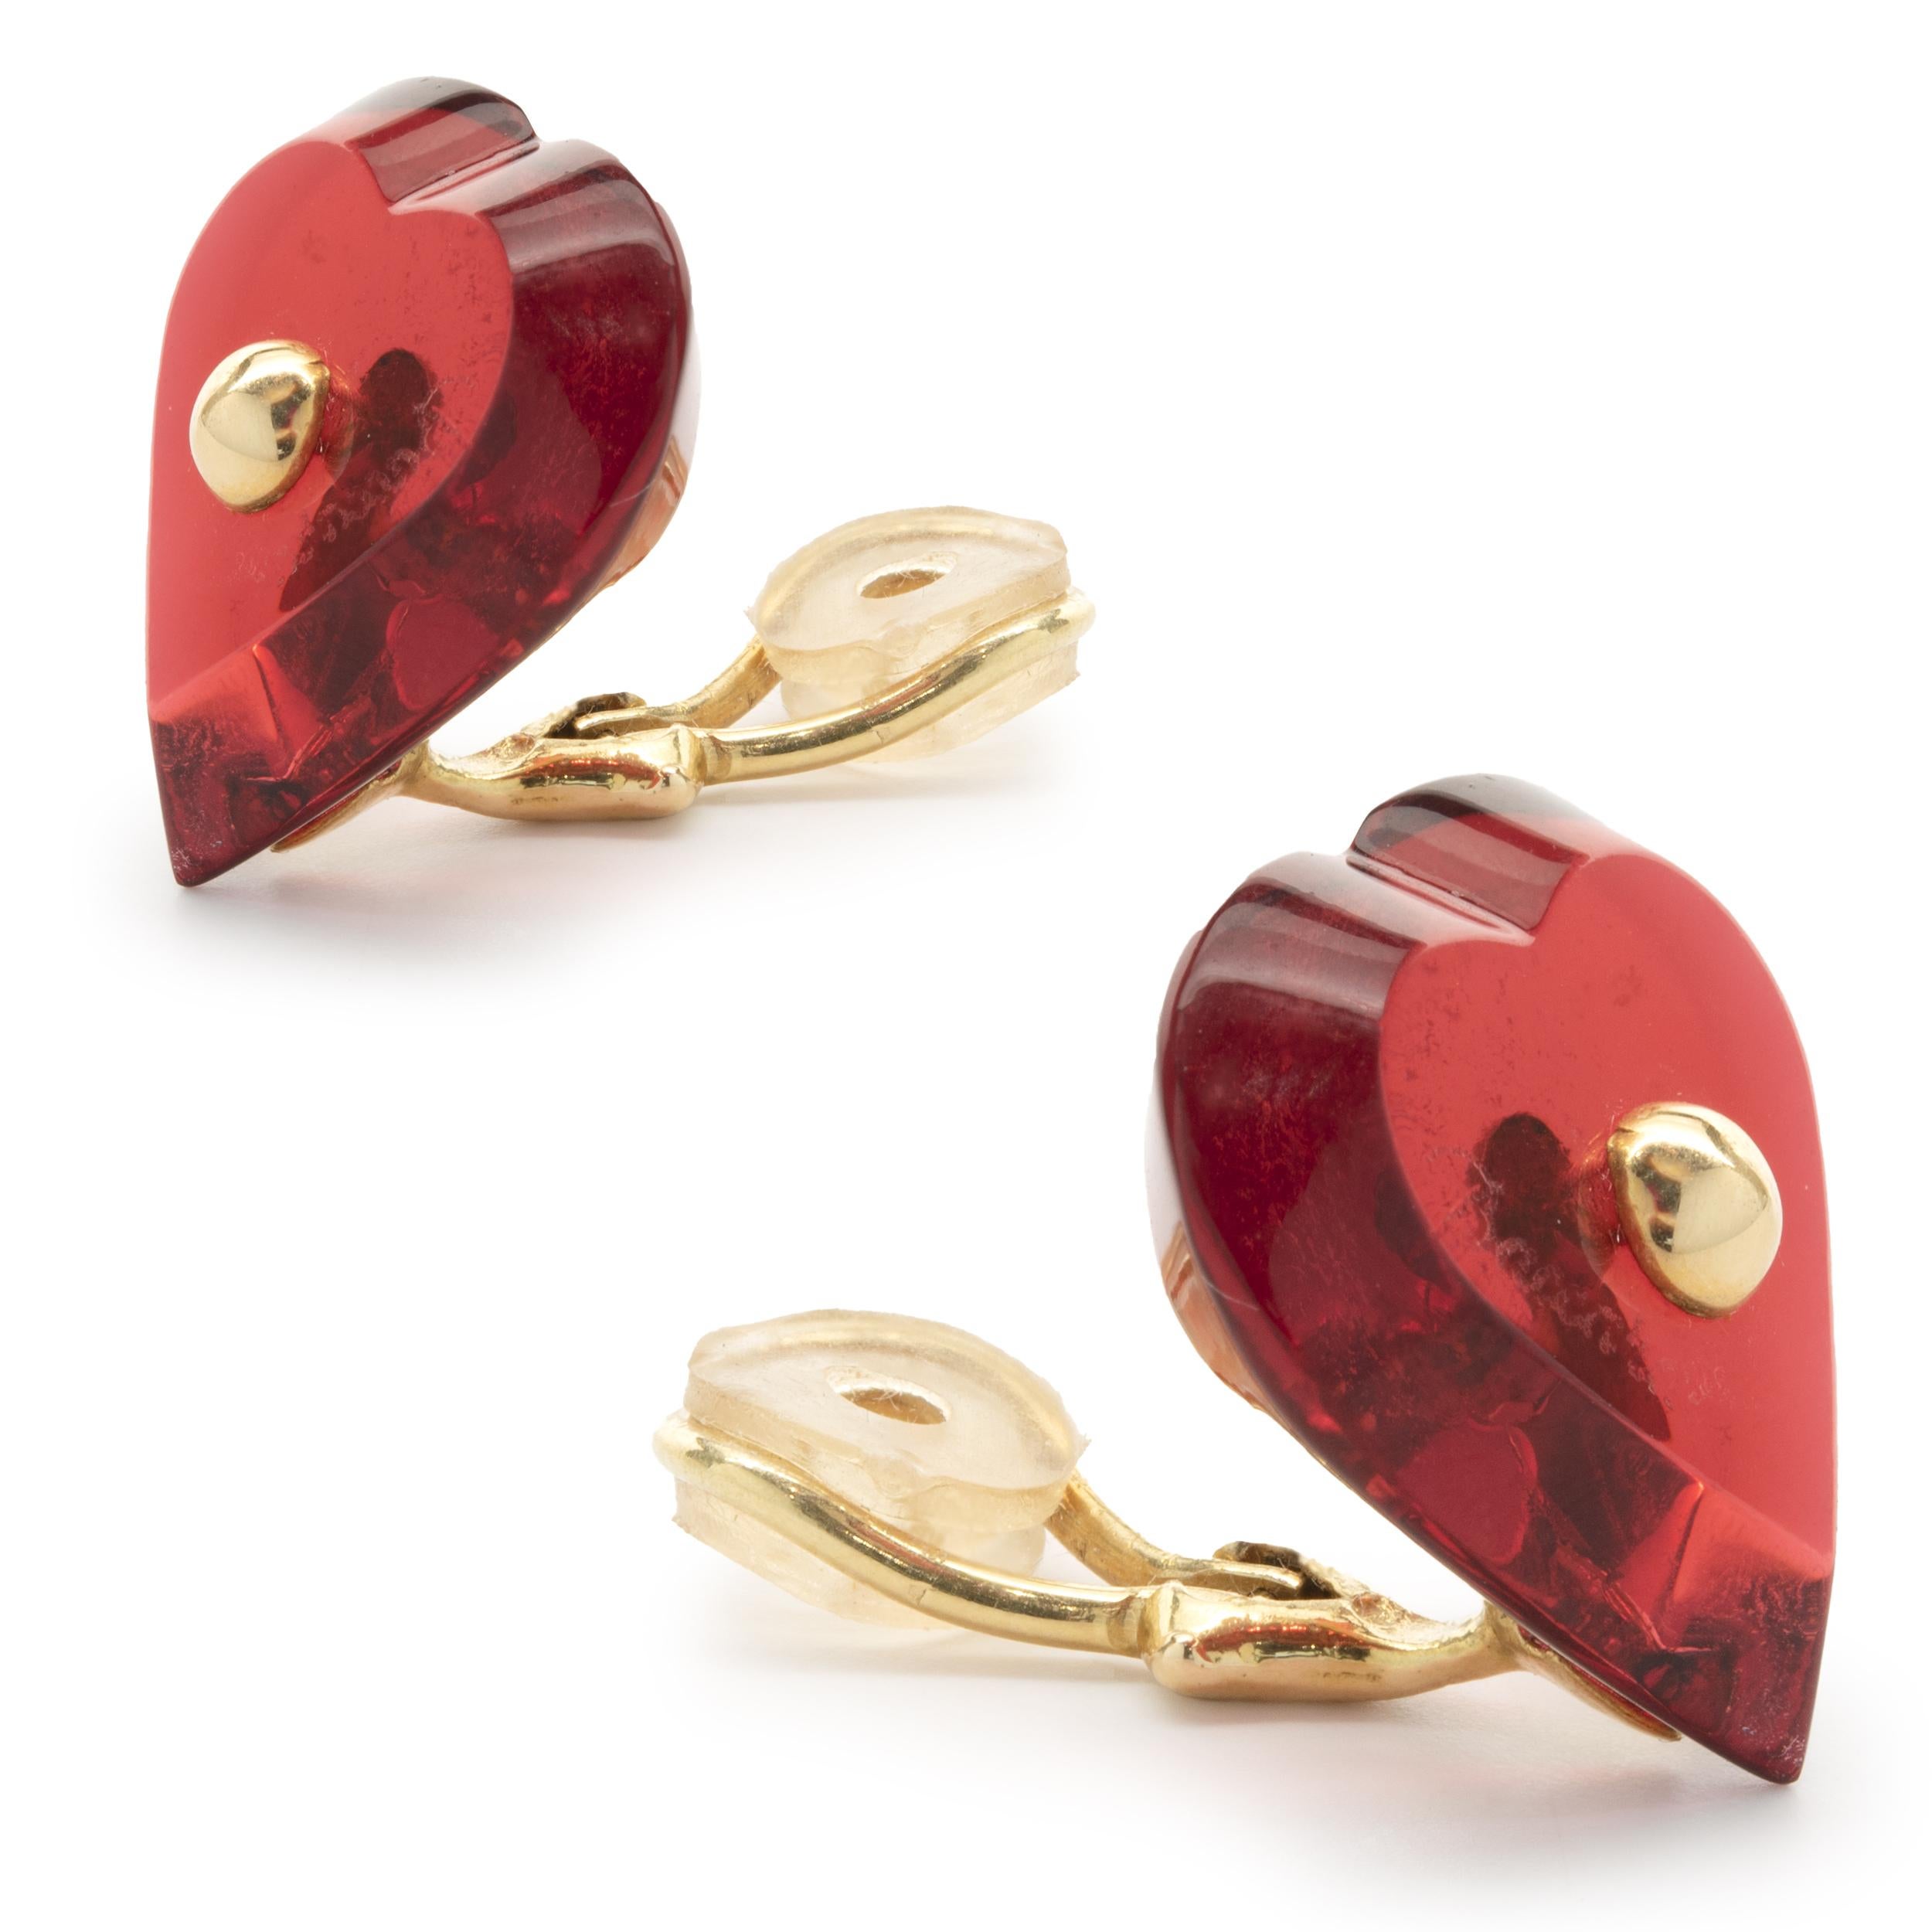 Designer: Baccarat
Material: 18K yellow gold / Red Acrylic
Weight: 10.92 grams
Dimensions: earrings measure 19.85mm 